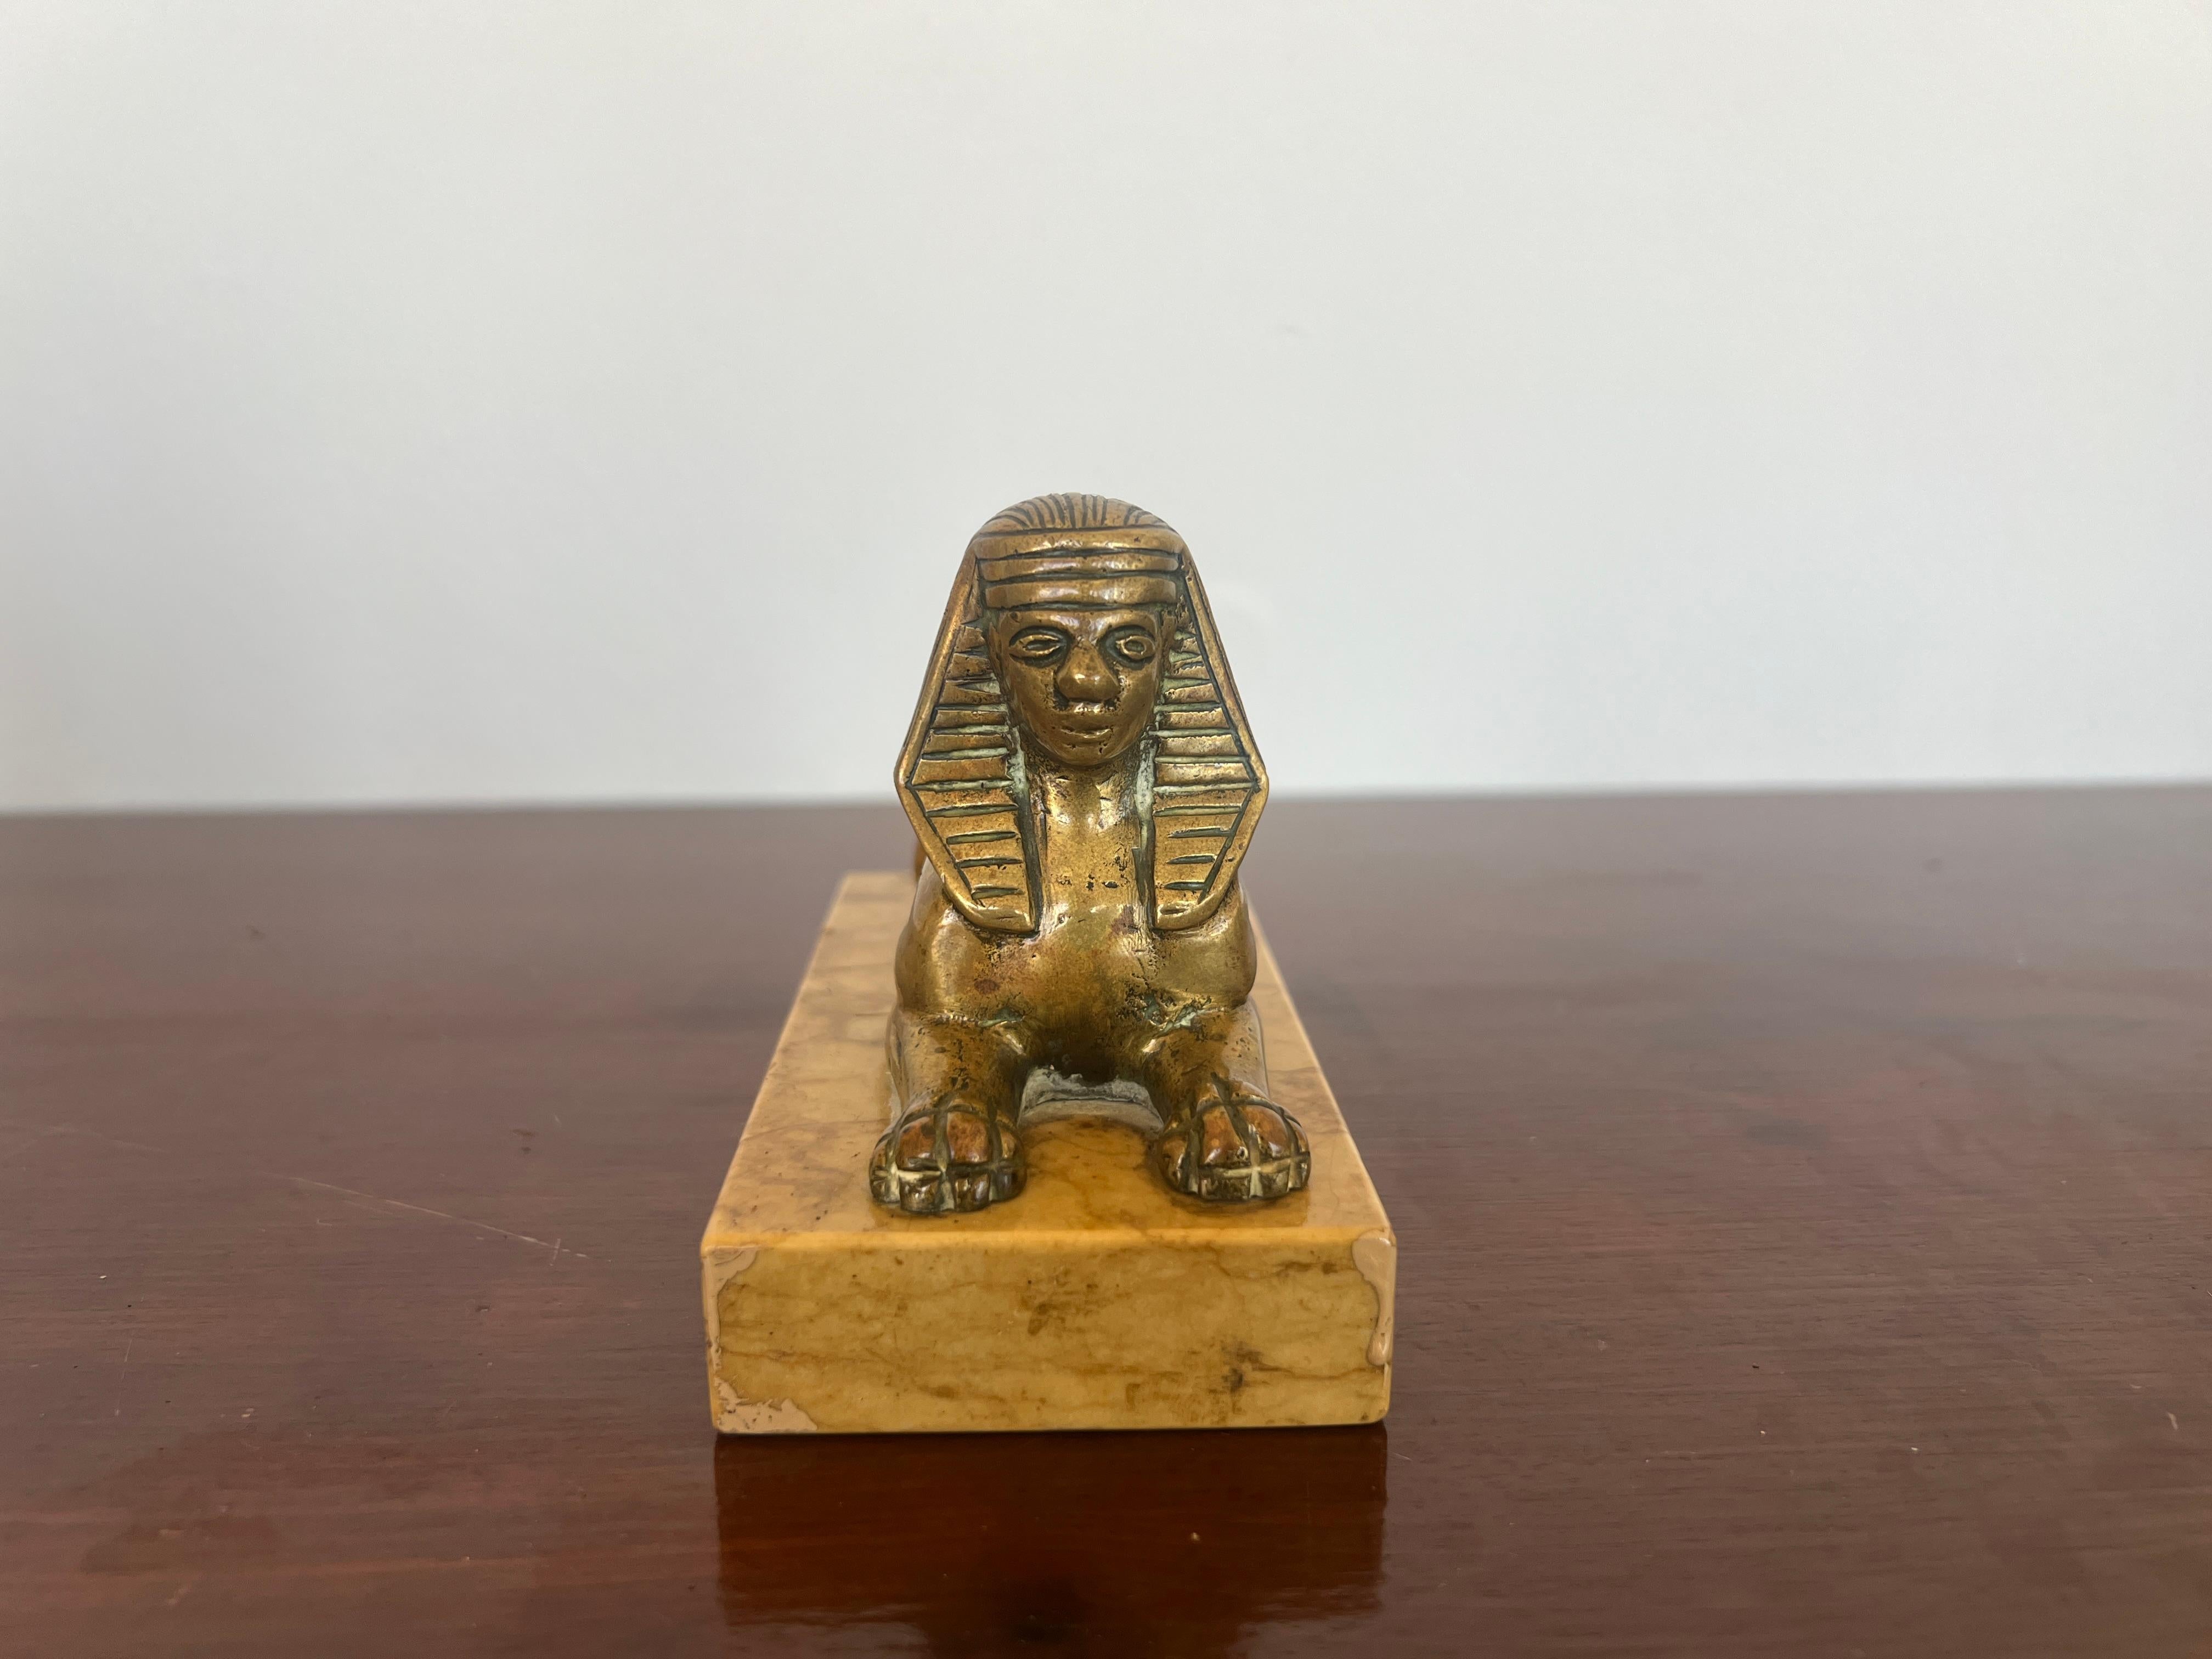 French or Italian, circa late 19th century.

An antique Grand Tour era bronze sculpture of an Egyptian sphinx in the Egyptian revival taste. Mounted to the original sienna marble base. Unmarked.